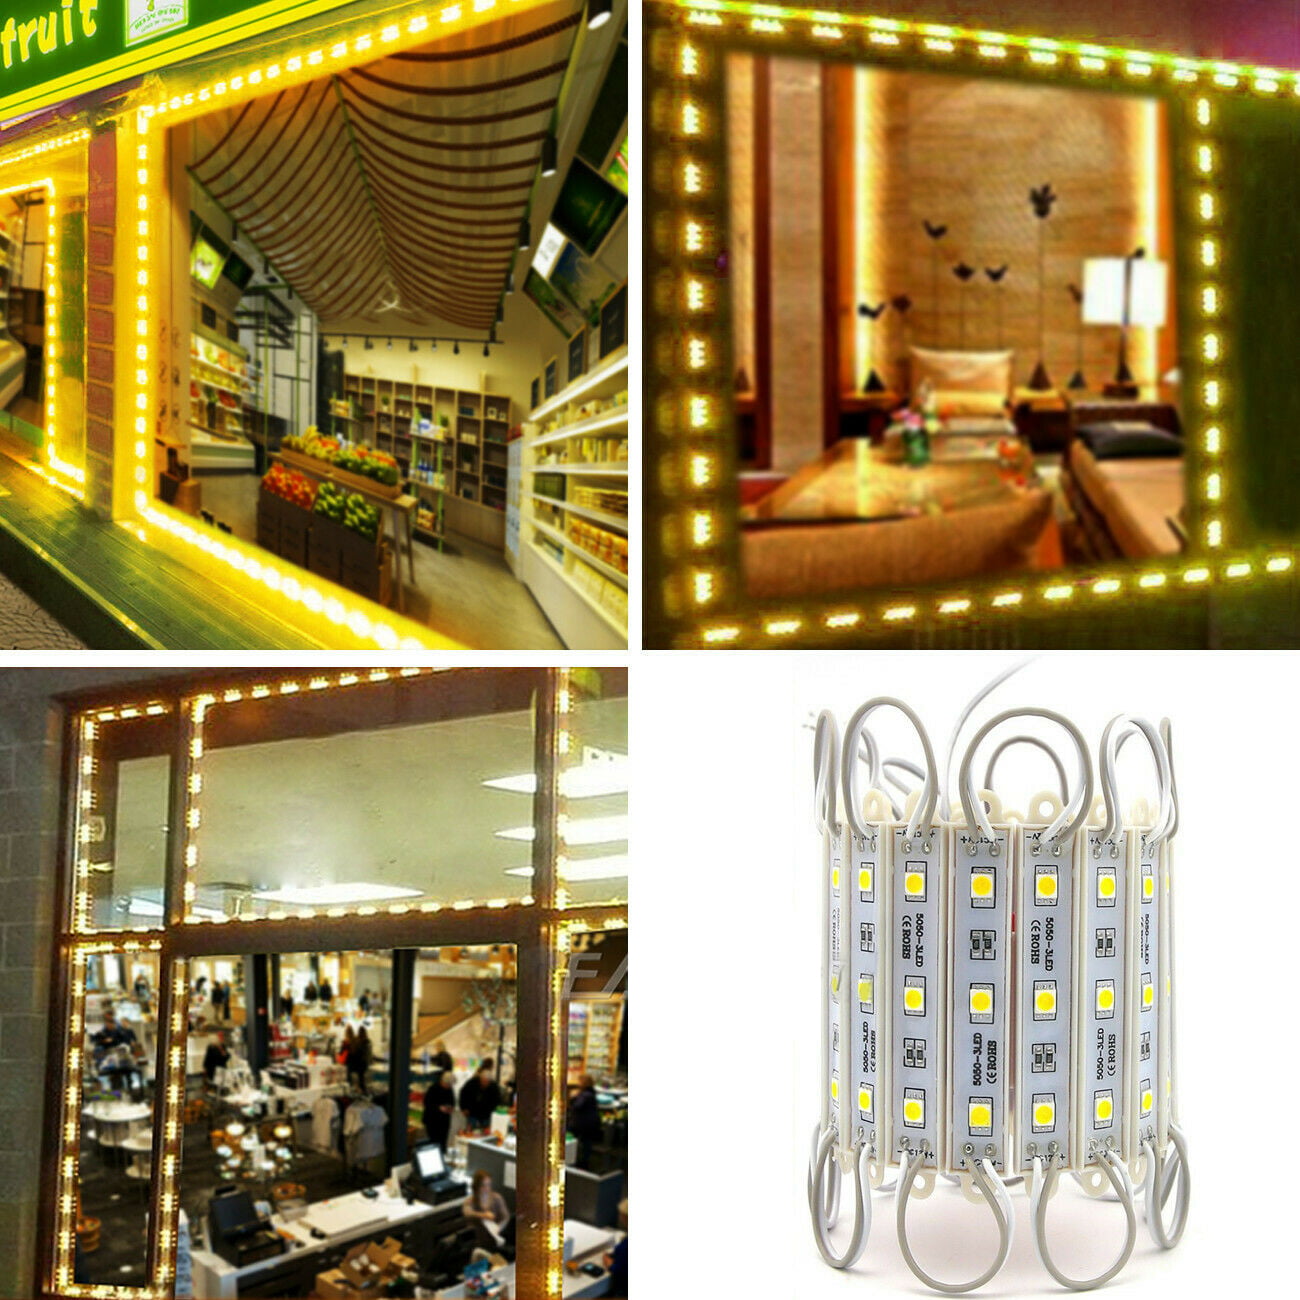 Module Lights EAGWELL COB LED Module Strip Light Bead Chip Waterproof DC 12V 2.4W Ultra Bright DIY Business Decorative Lights for Letter Sign Advertising-White 